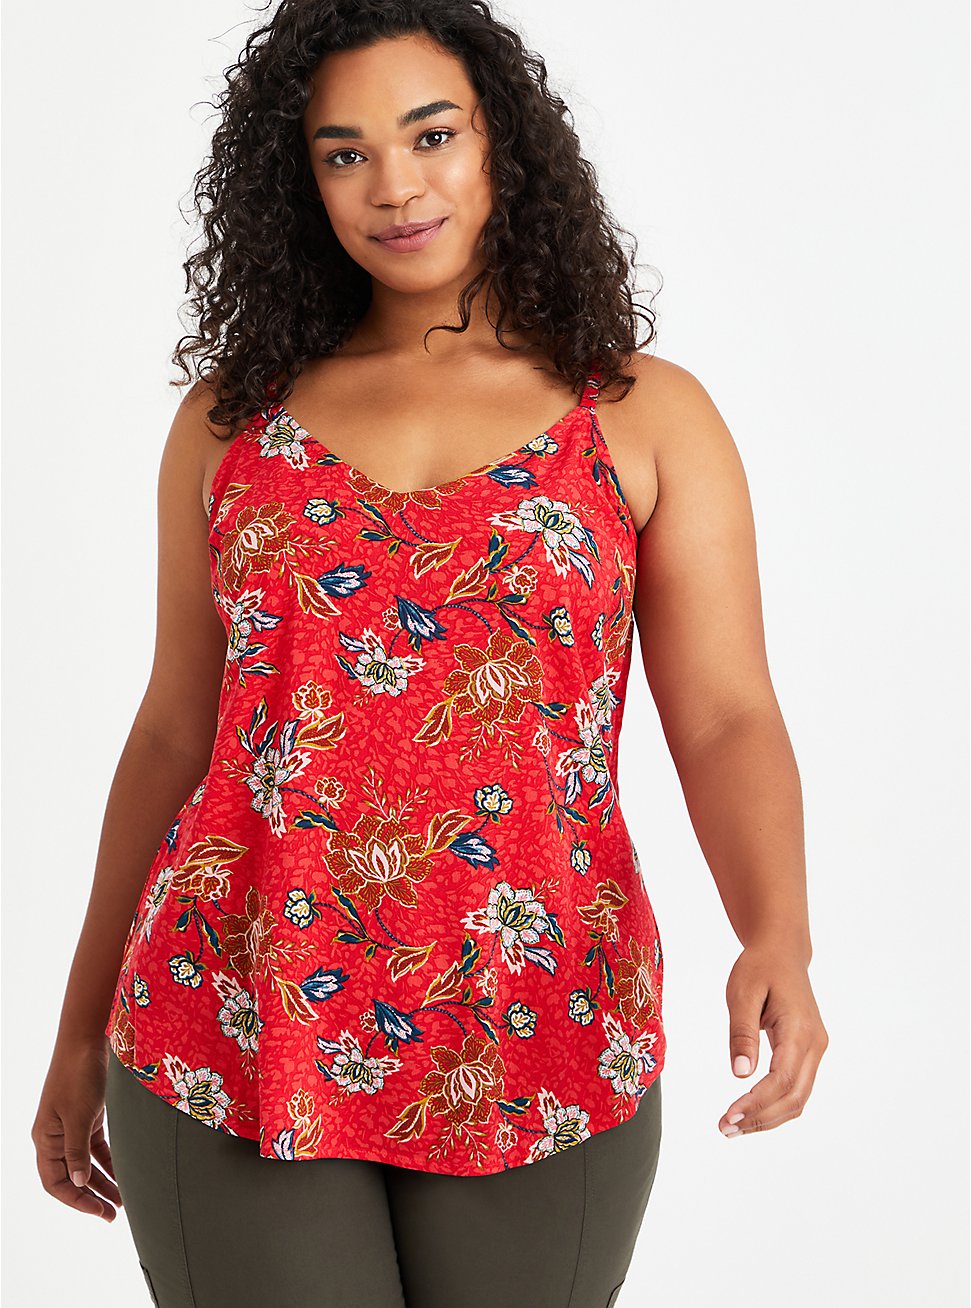 Ava - Textured Stretch Rayon Red Floral Cami, FLORAL - RED, hi-res